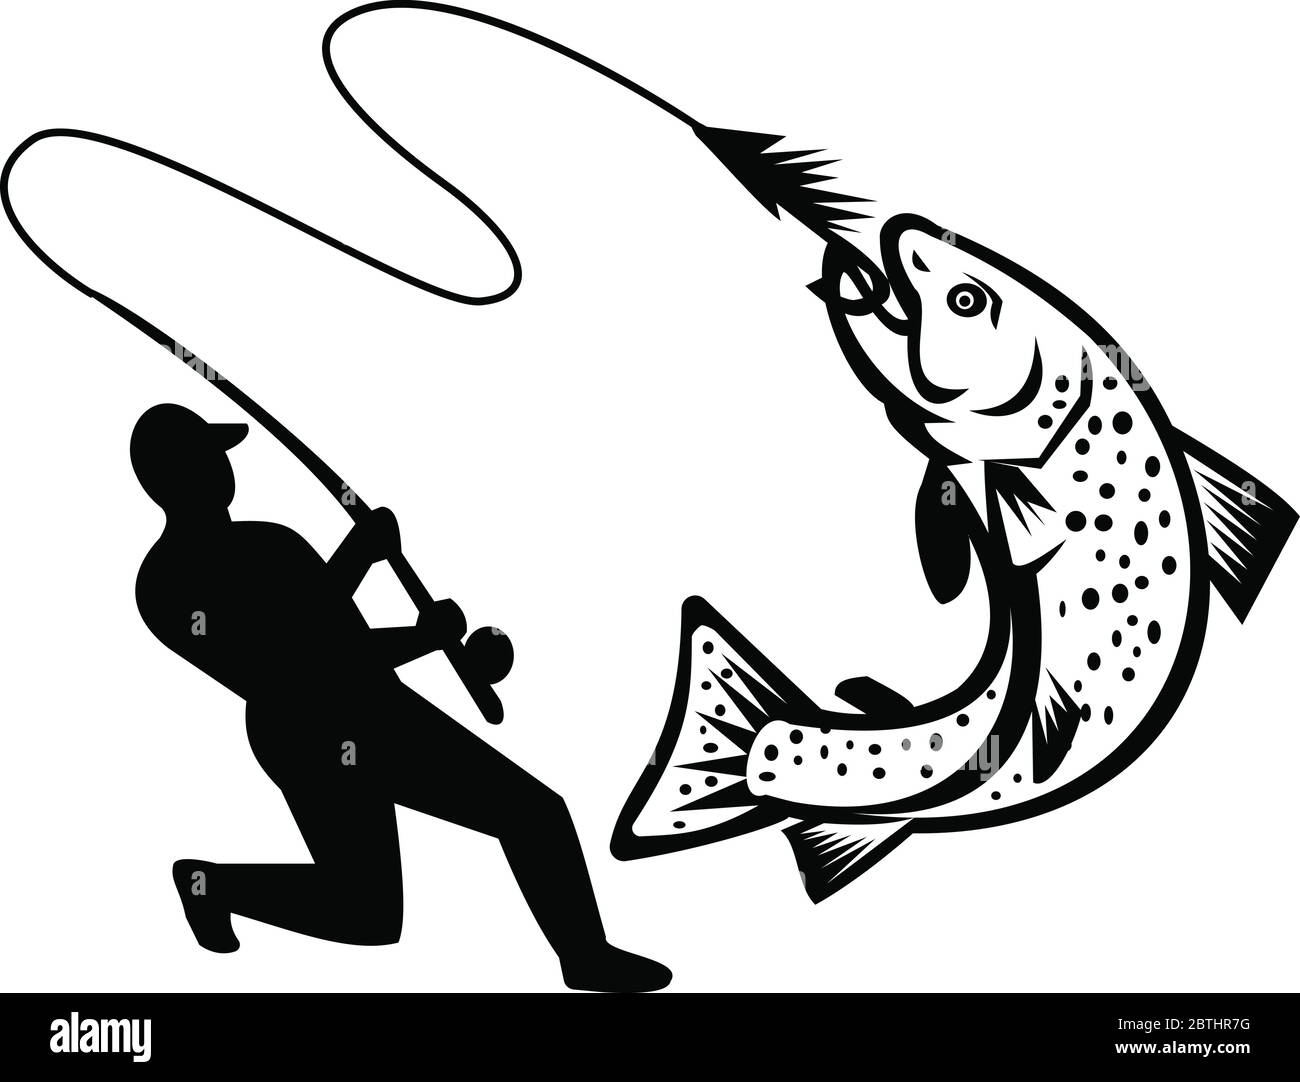 https://c8.alamy.com/comp/2BTHR7G/illustration-of-a-fly-fisherman-fishing-casting-rod-and-reel-hooking-brook-trout-viewed-from-the-side-on-isolated-white-background-done-in-retro-black-2BTHR7G.jpg